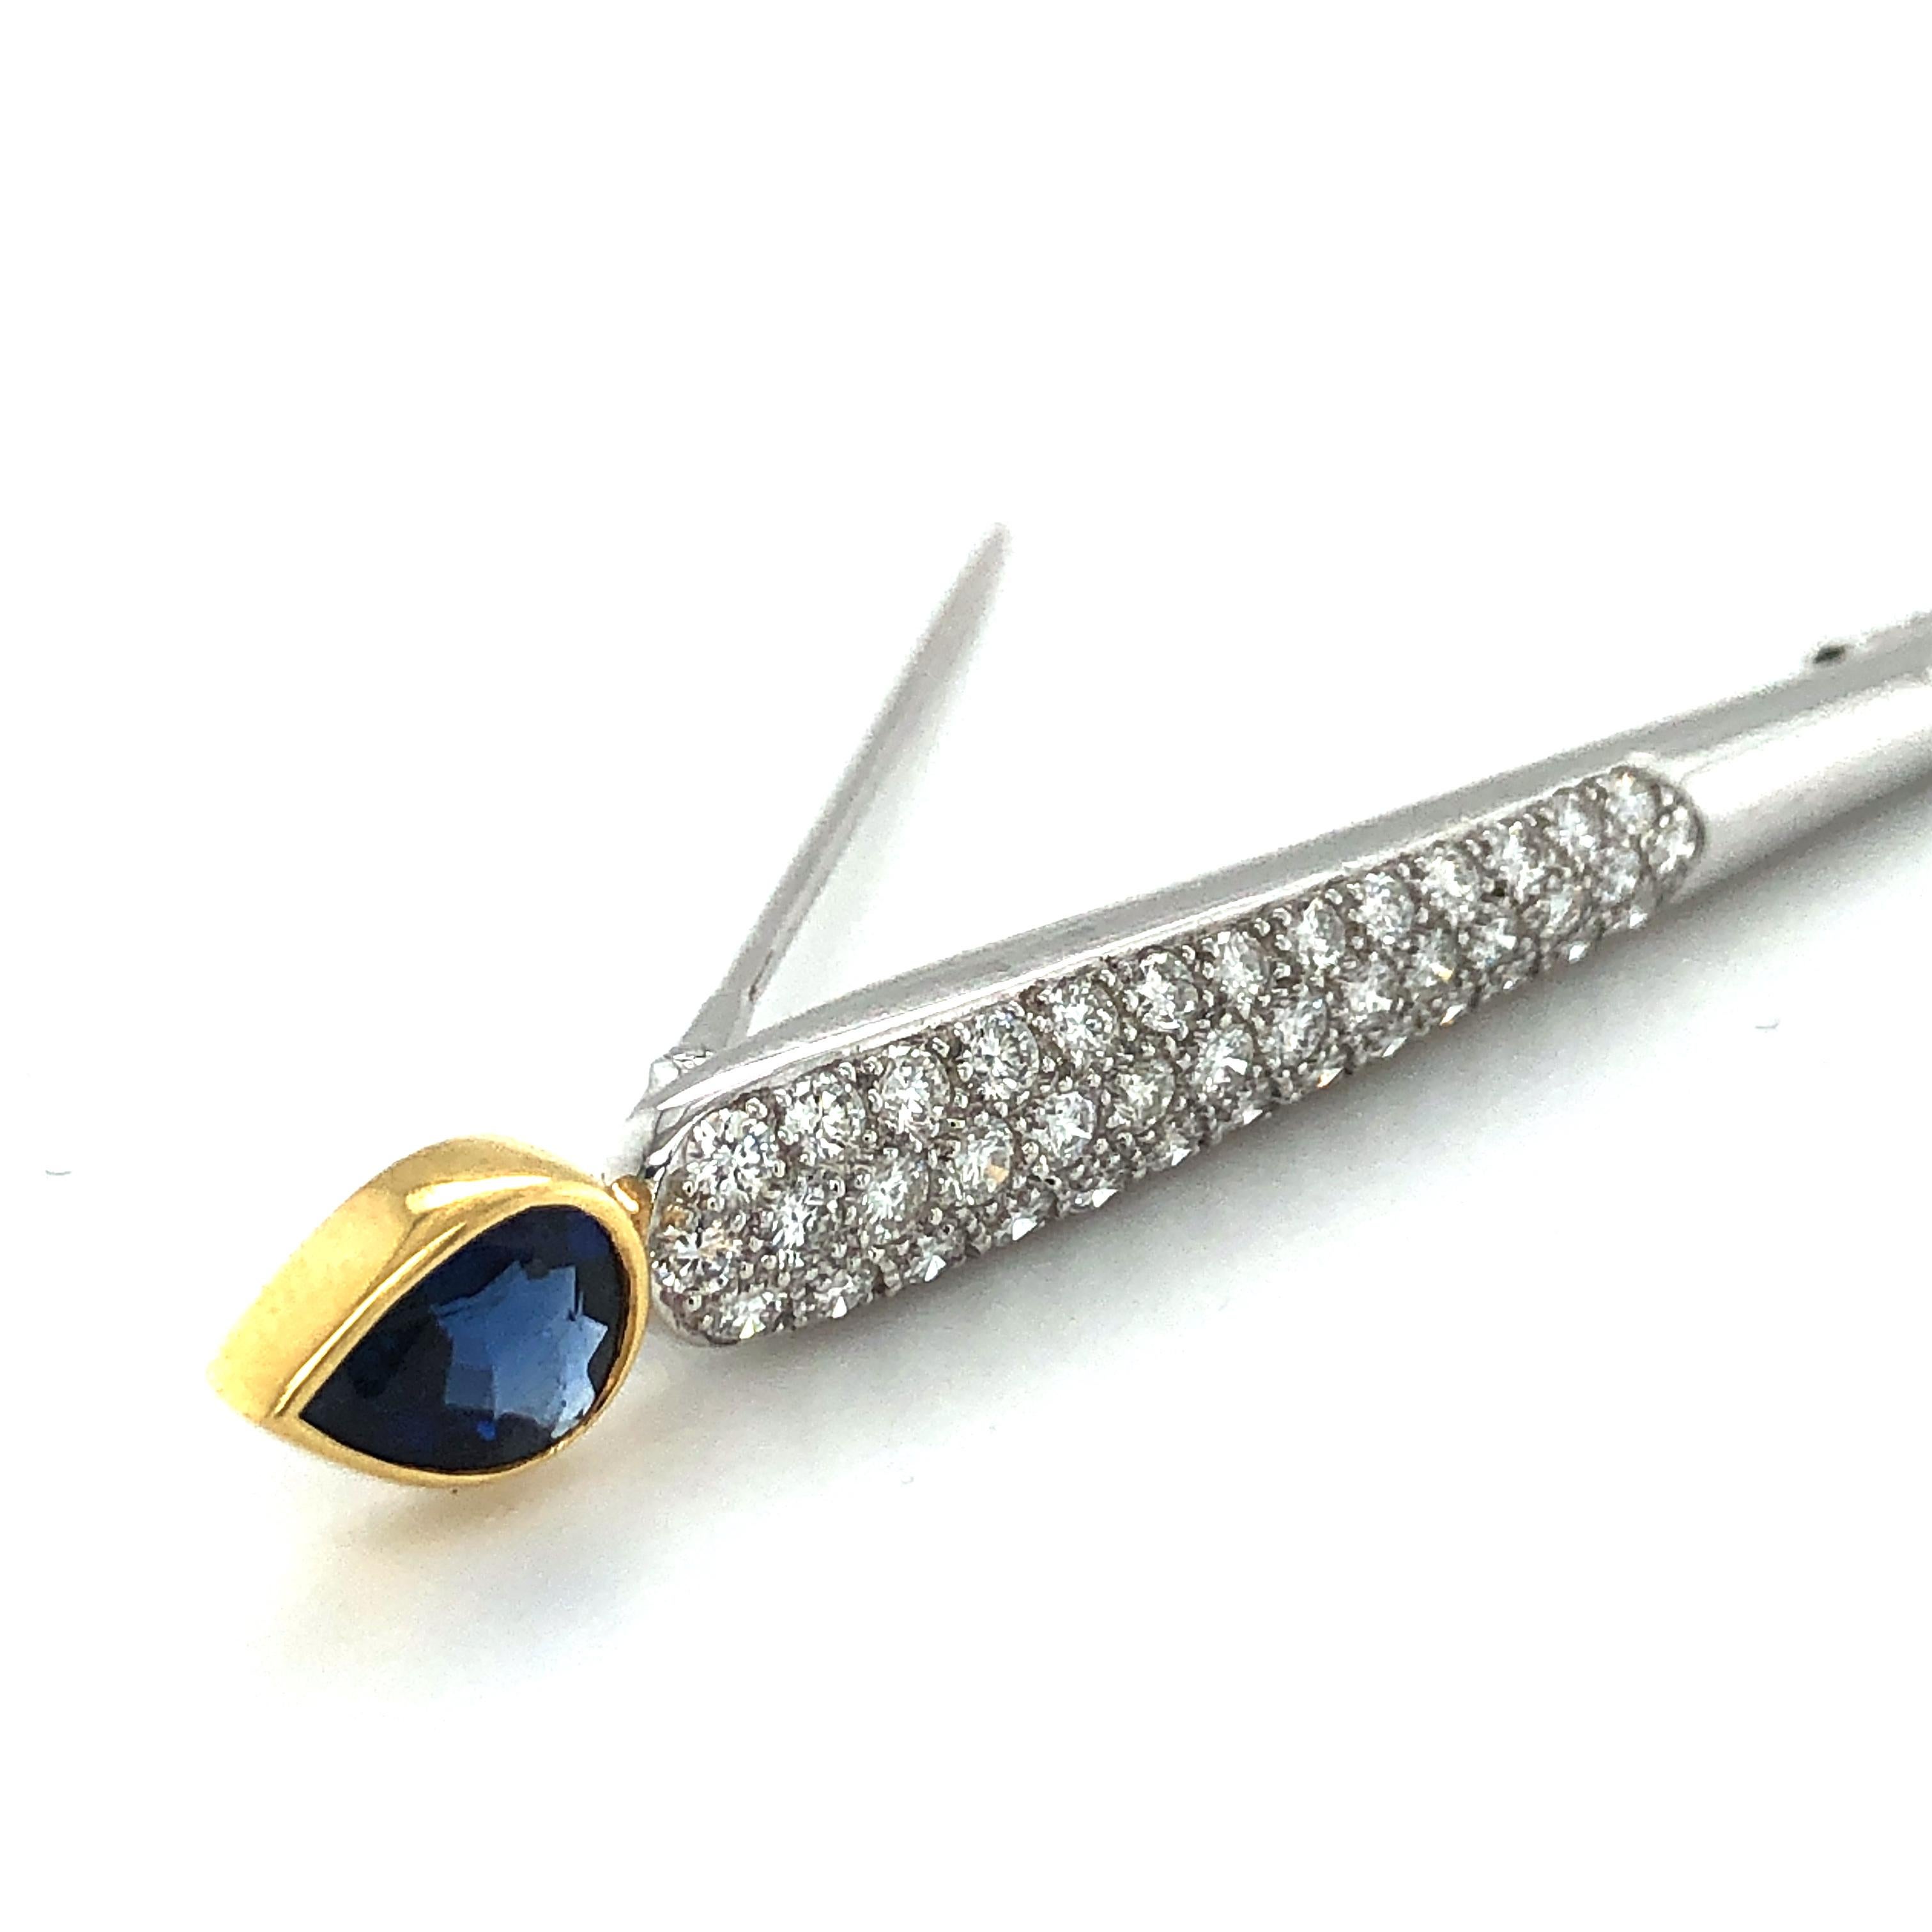 Modern bar pin from the early 2000 from Swiss Jeweler Gübelin. Longish brooch designed as an arrow, pavé set with 40 brilliant-cut diamonds totaling 1.04 ct. Ending in a yellow gold bezel set, richly saturated pear-shape sapphire of 1.74. ct.

This